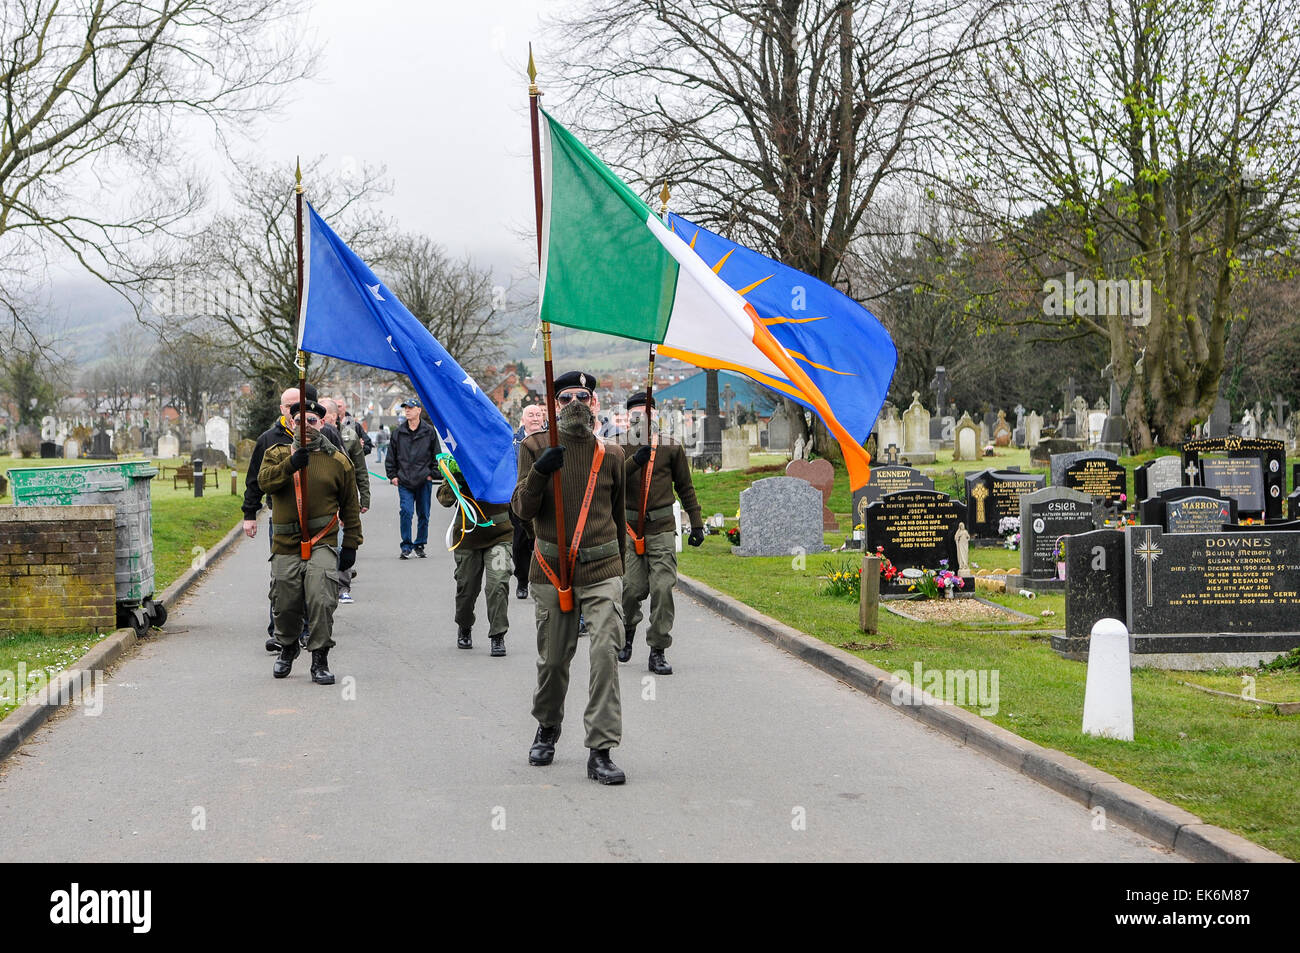 Men dressed in Irish paramilitary uniforms, with their faces covered by military scrim scarves carry Irish flags in Milltown cemetery, during the annu Stock Photo